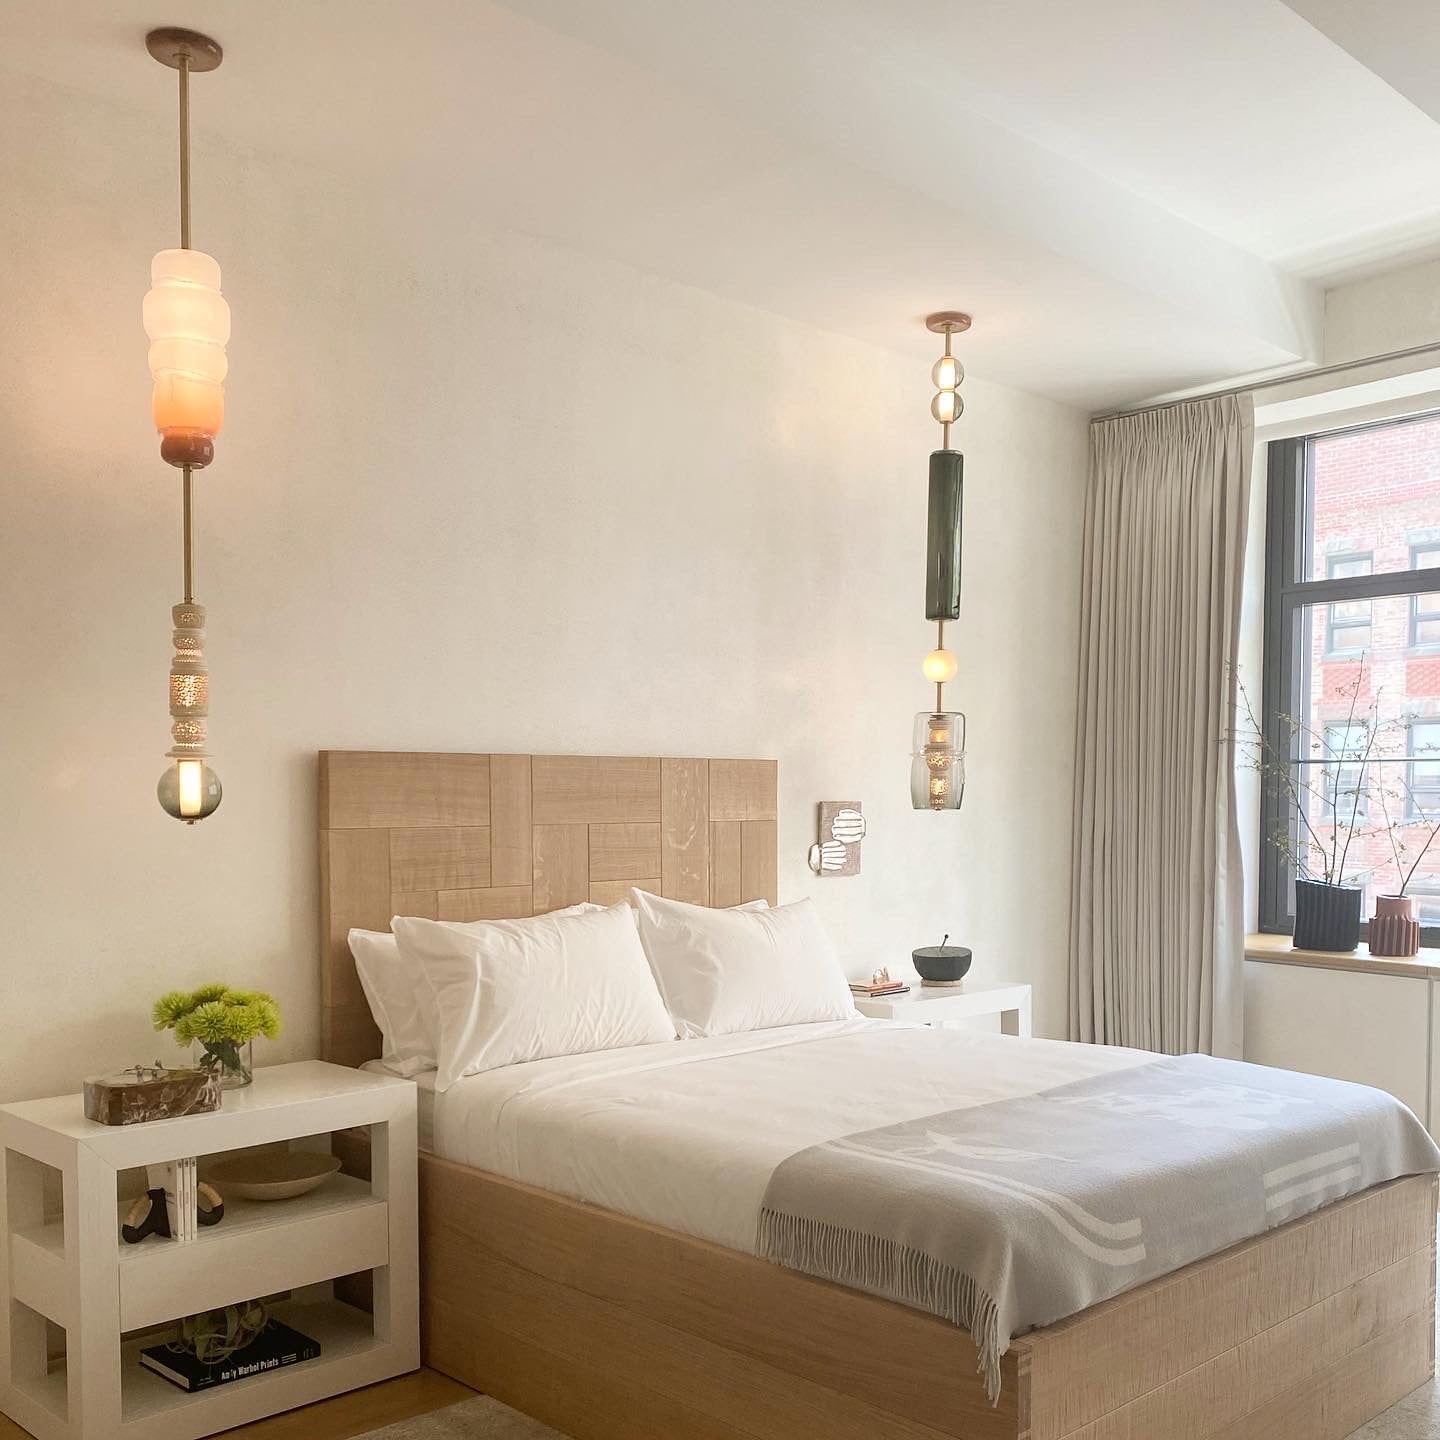 WOVEN COLONY- Bedside Pendants for West Village Home